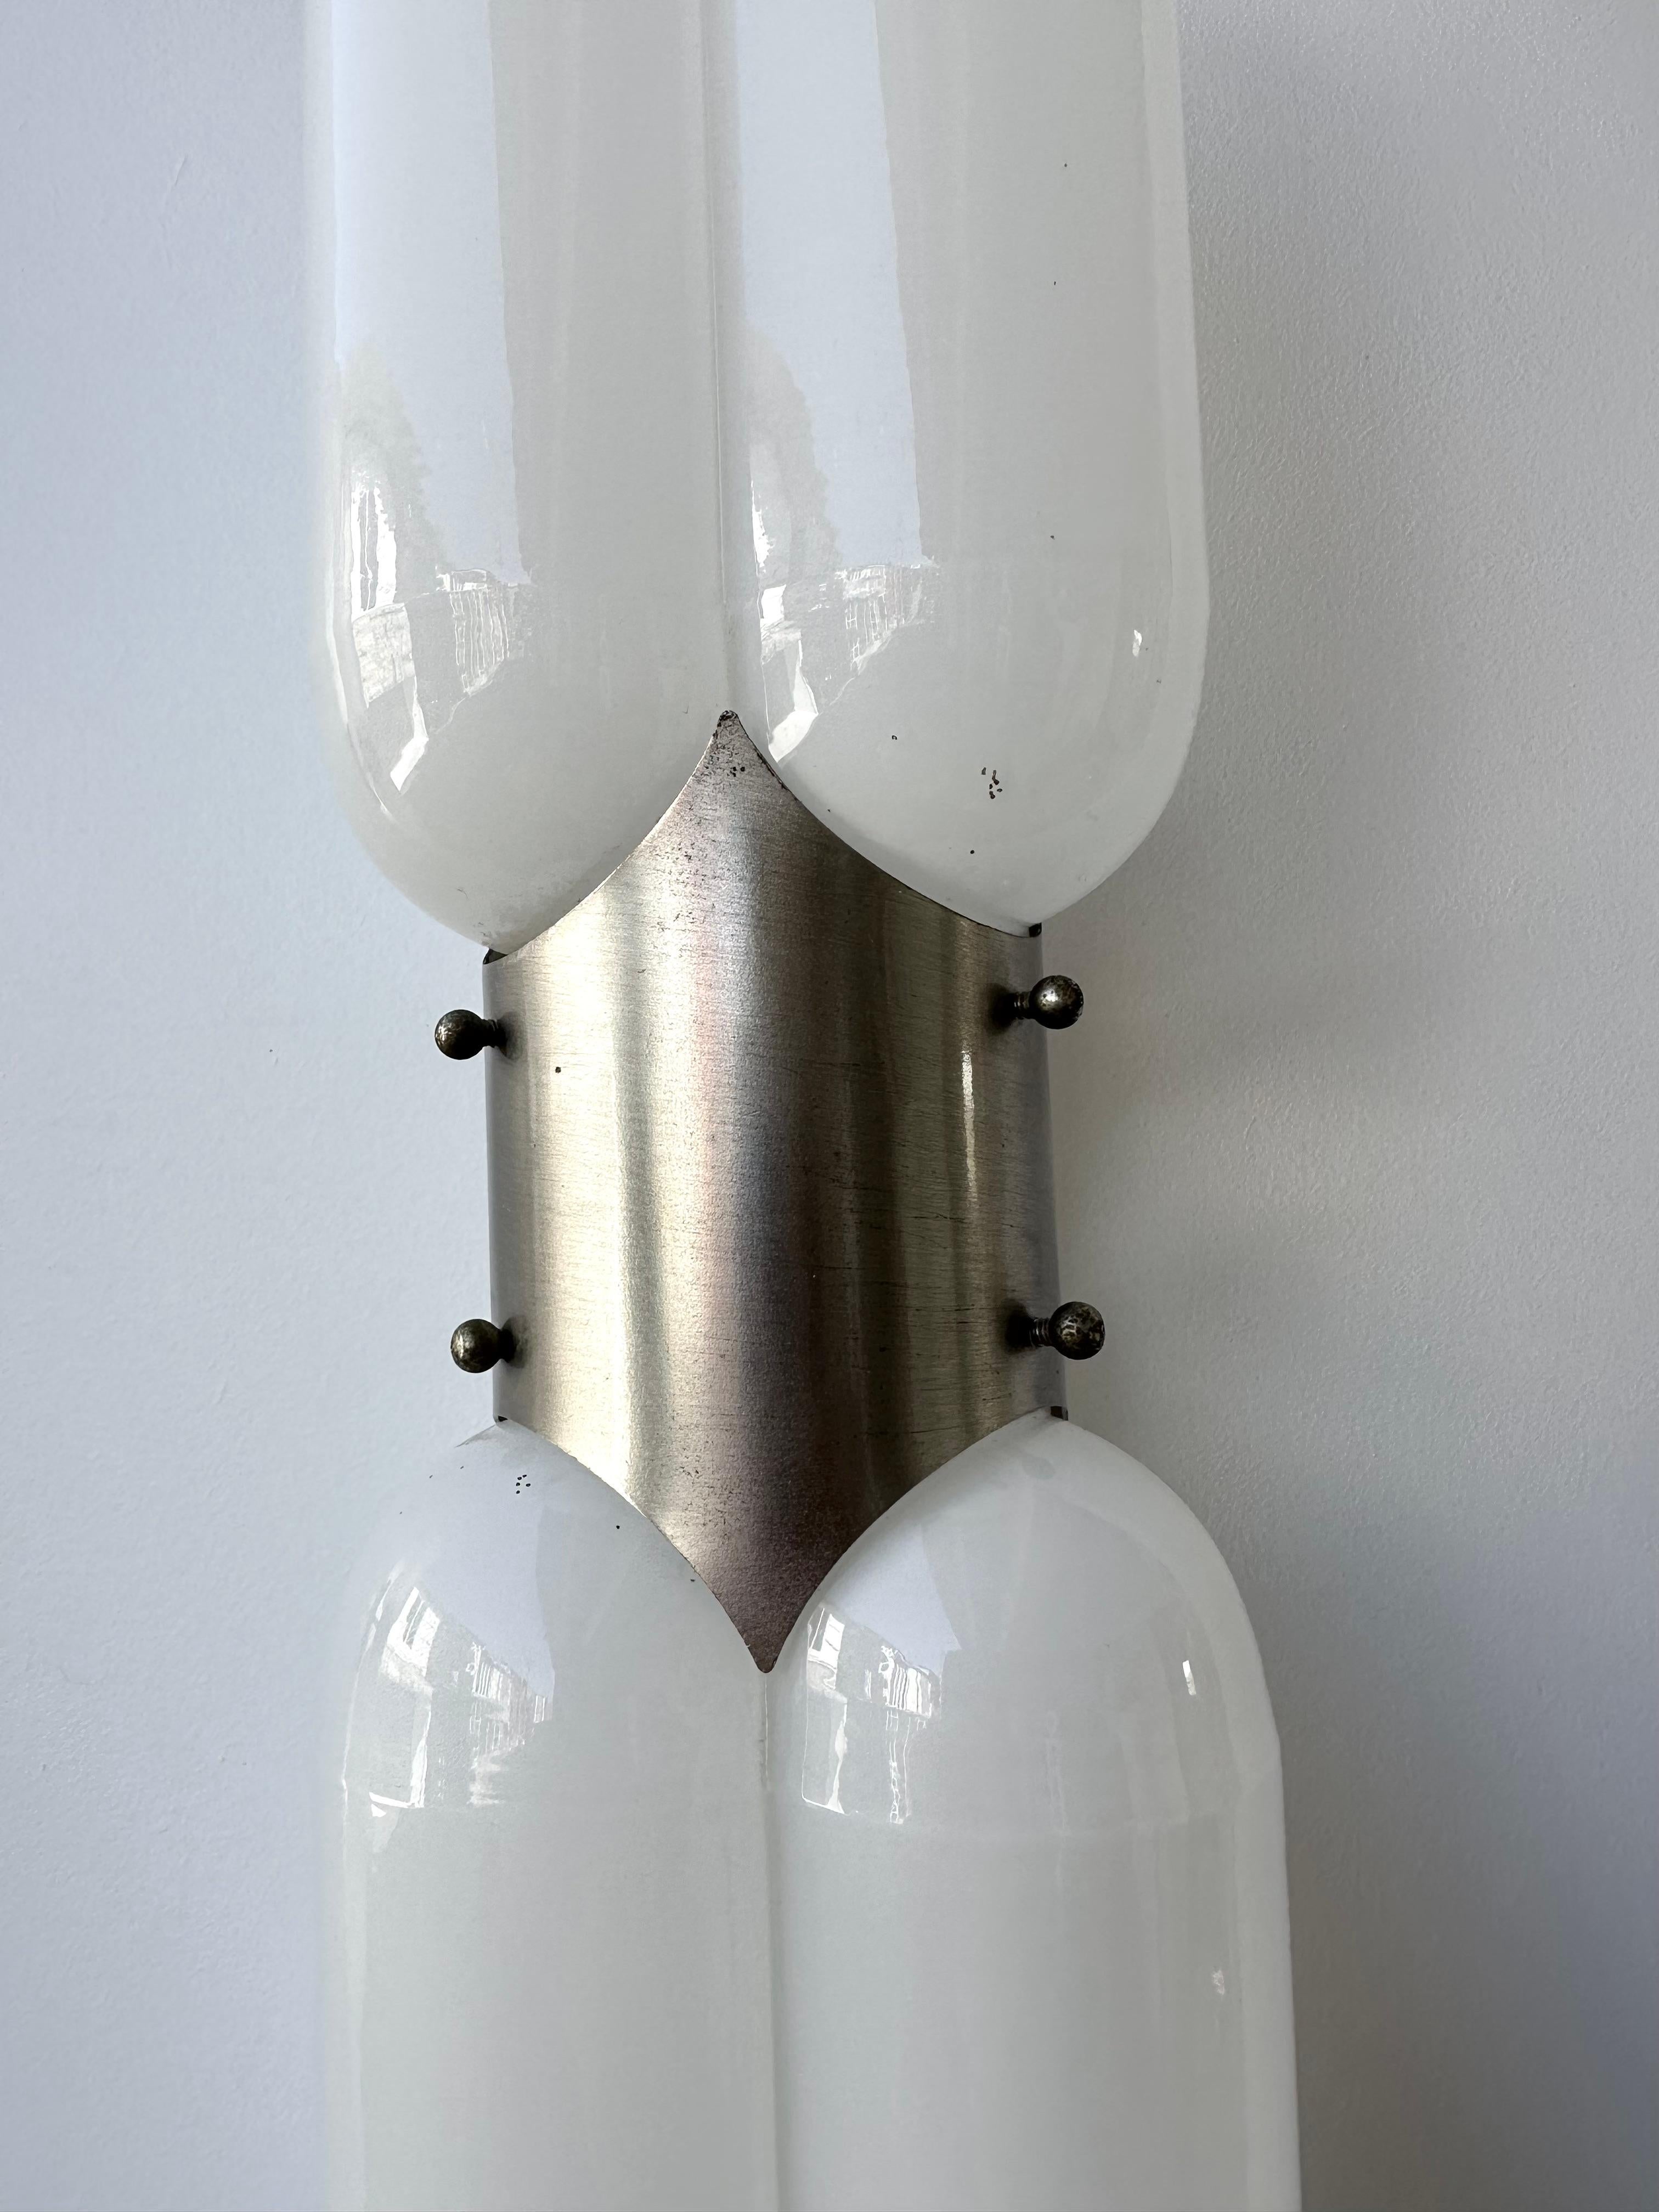 Mid-Century Modern Space Age Pair of gellule torpedo wall lamps lights lightning sconces by Carlo Nason for the manufacture Mazzega, blown Murano glass, silver nickeled metal structure. Famous manufacture like Venini, Vistosi, La Murrina, VeArt,